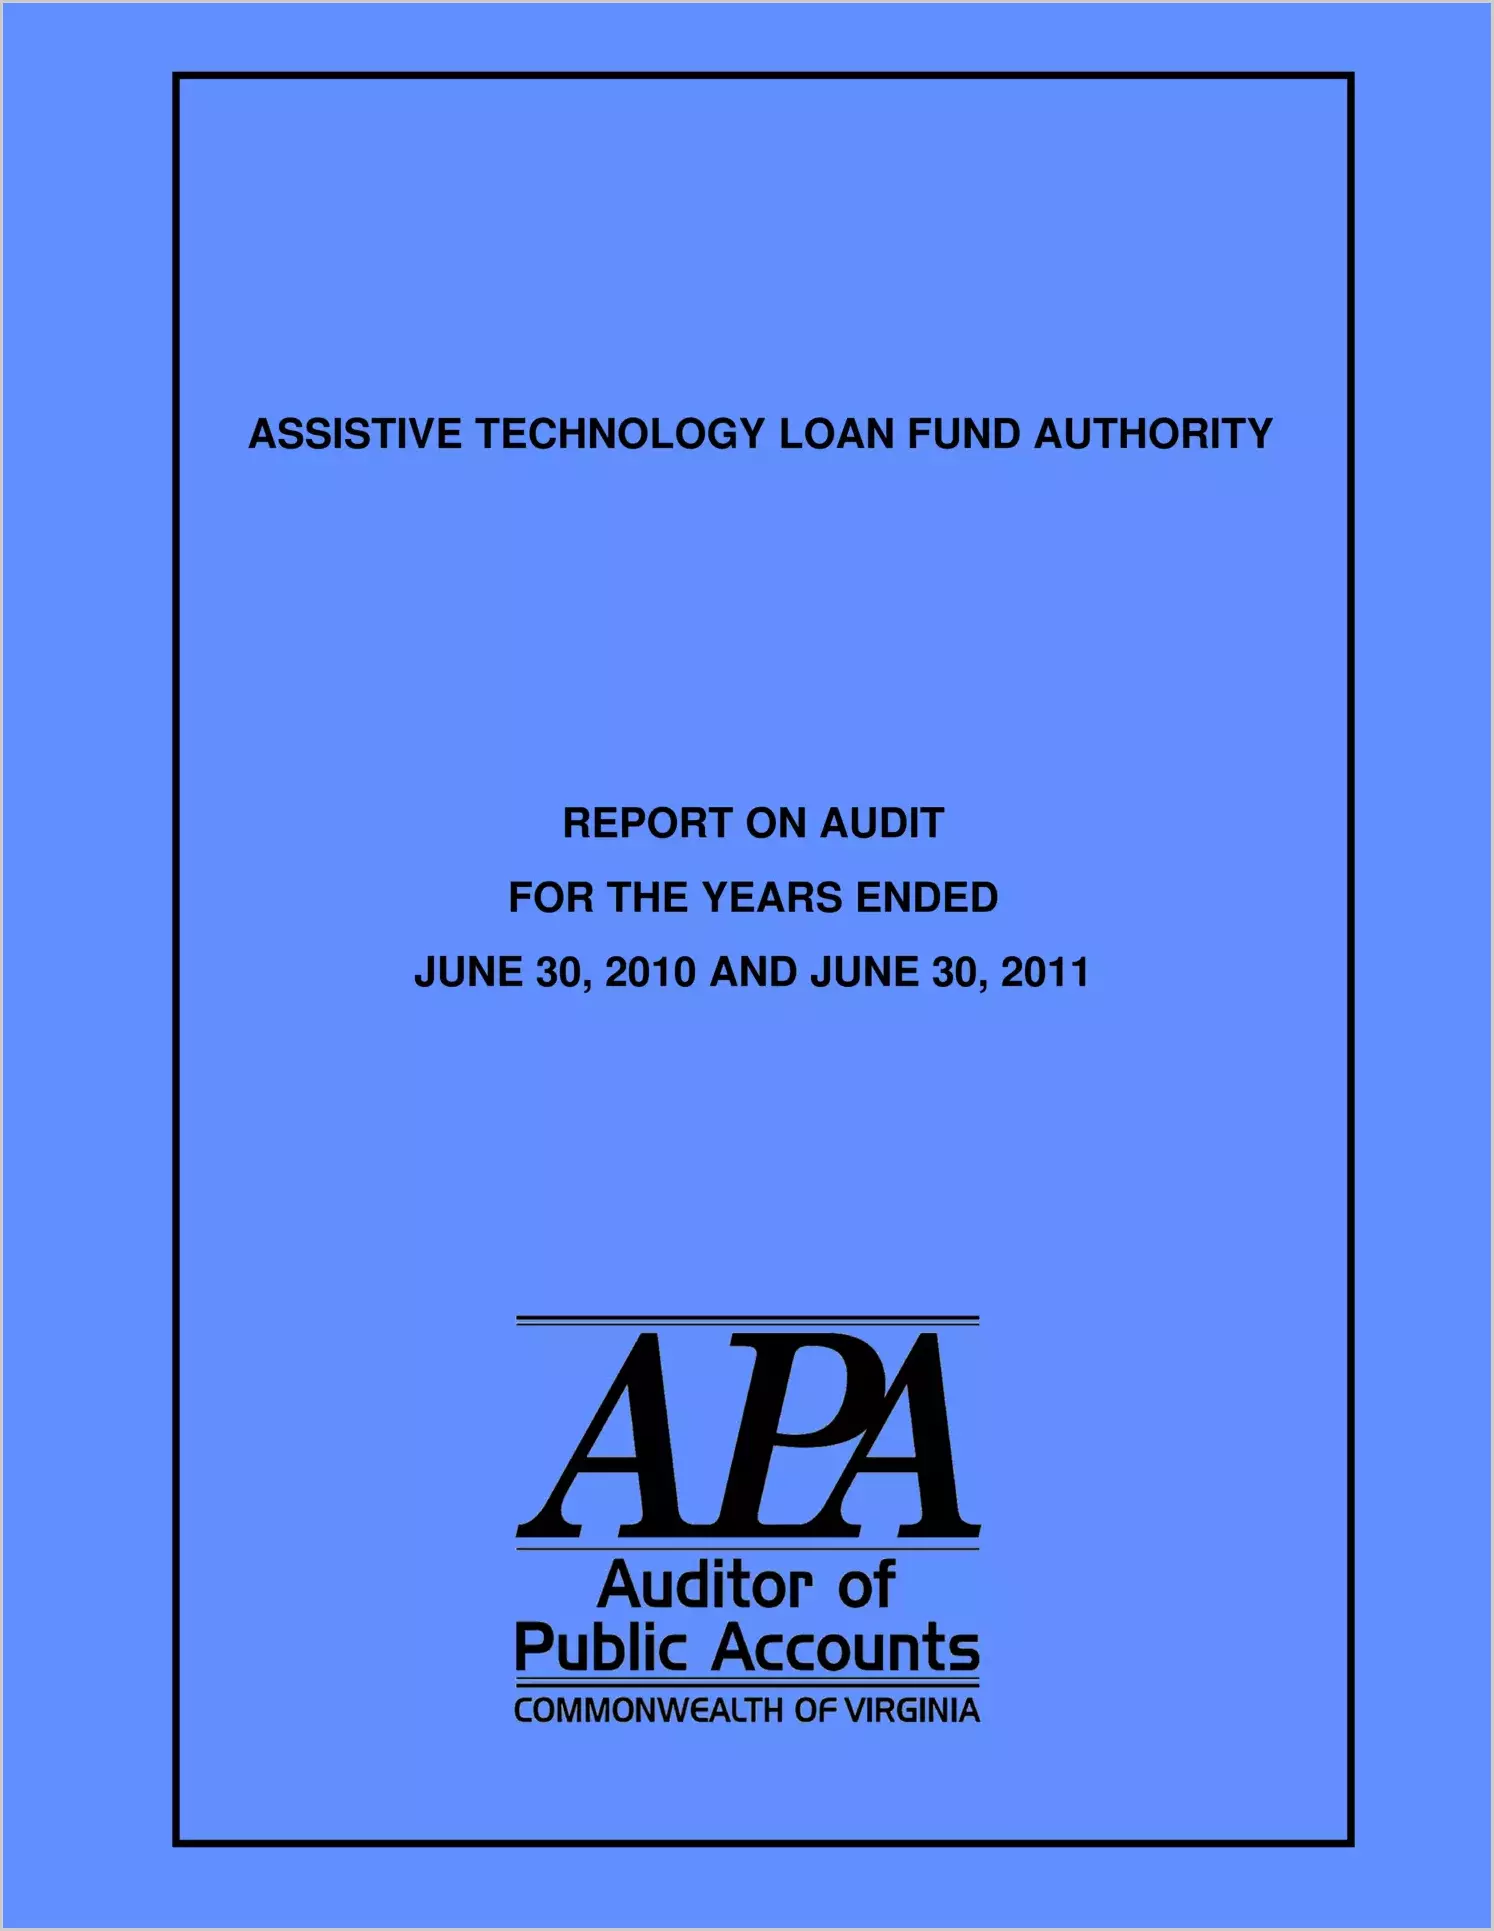 Assistive Technology Loan Fund Authority report on audit for the years ended June 30, 2010 and June 30, 2011